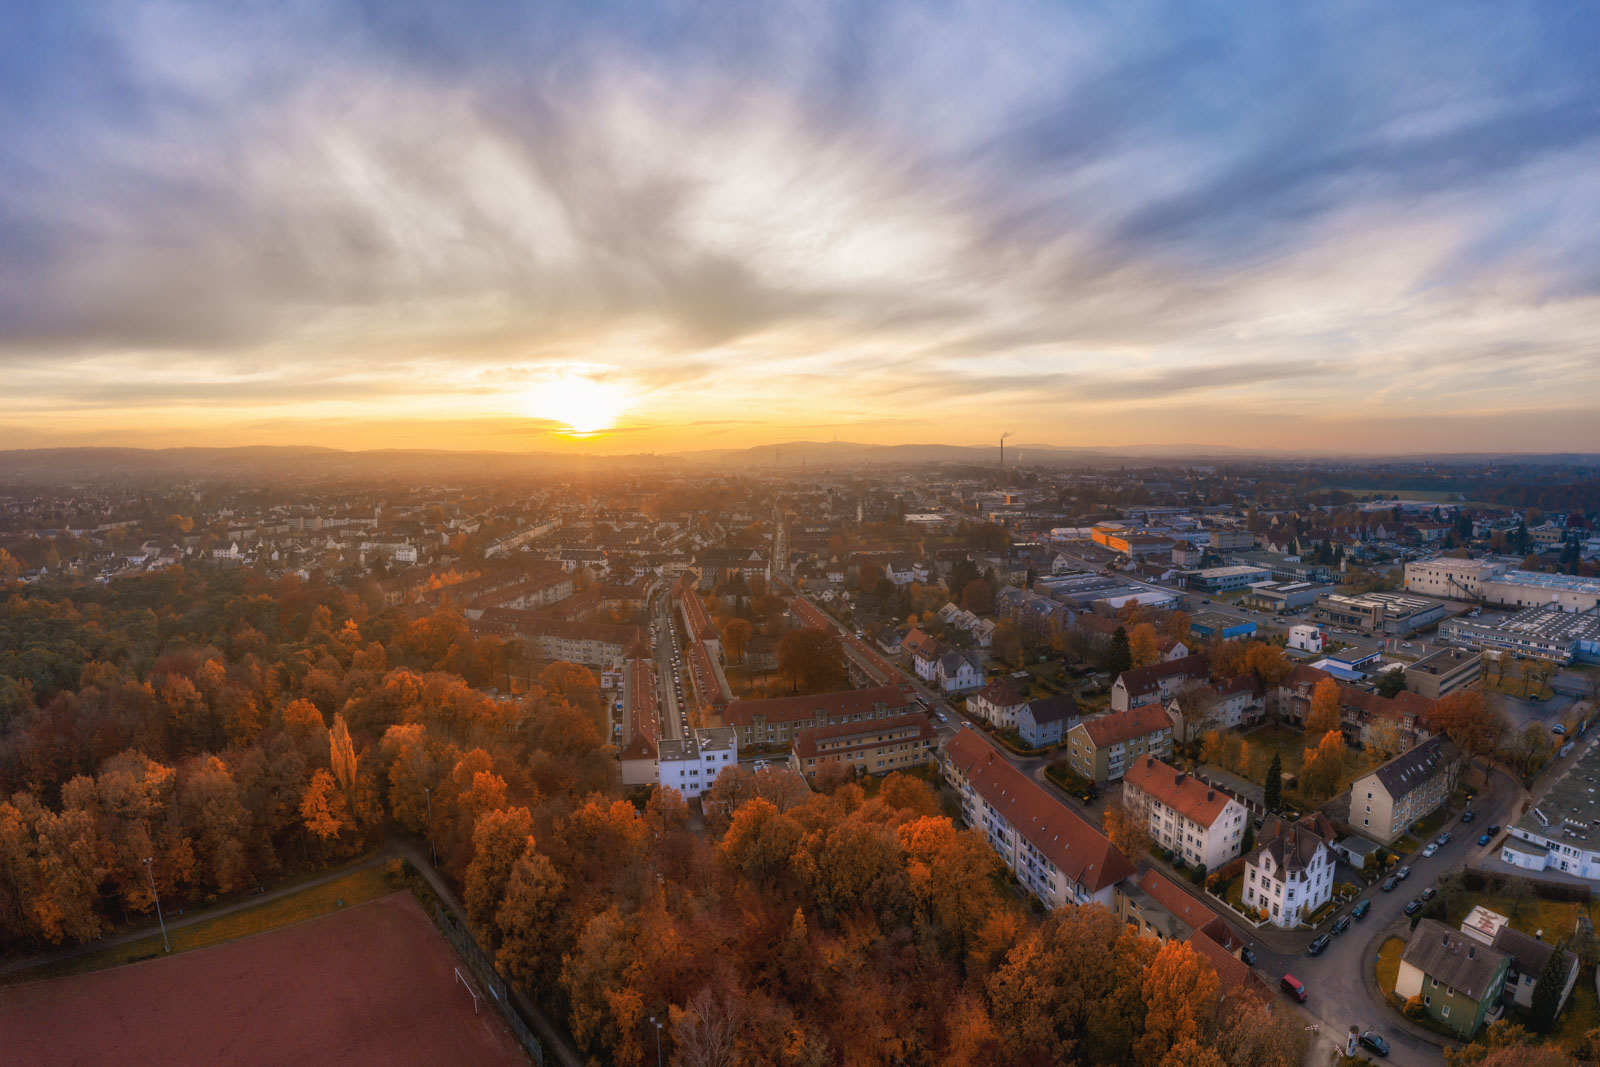 Sunday afternoon shortly before sunset in the east of Bielefeld.